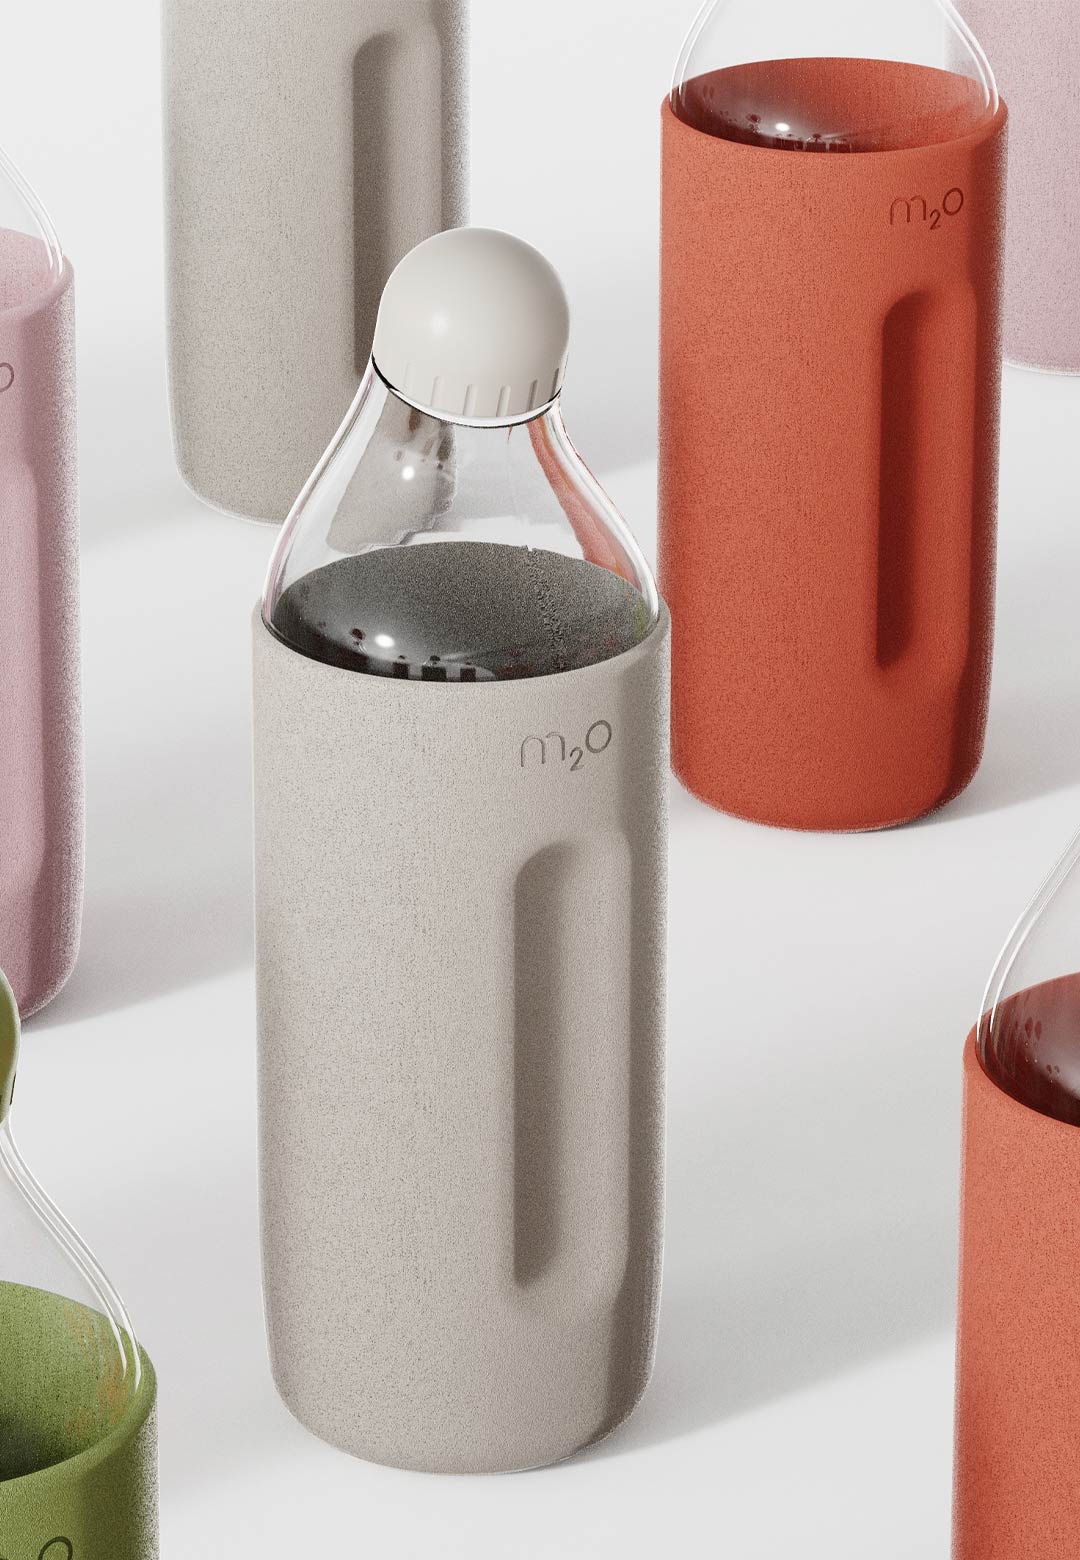 Michael Young’s new M2O bottle design features an angled neck and easy-grip cap